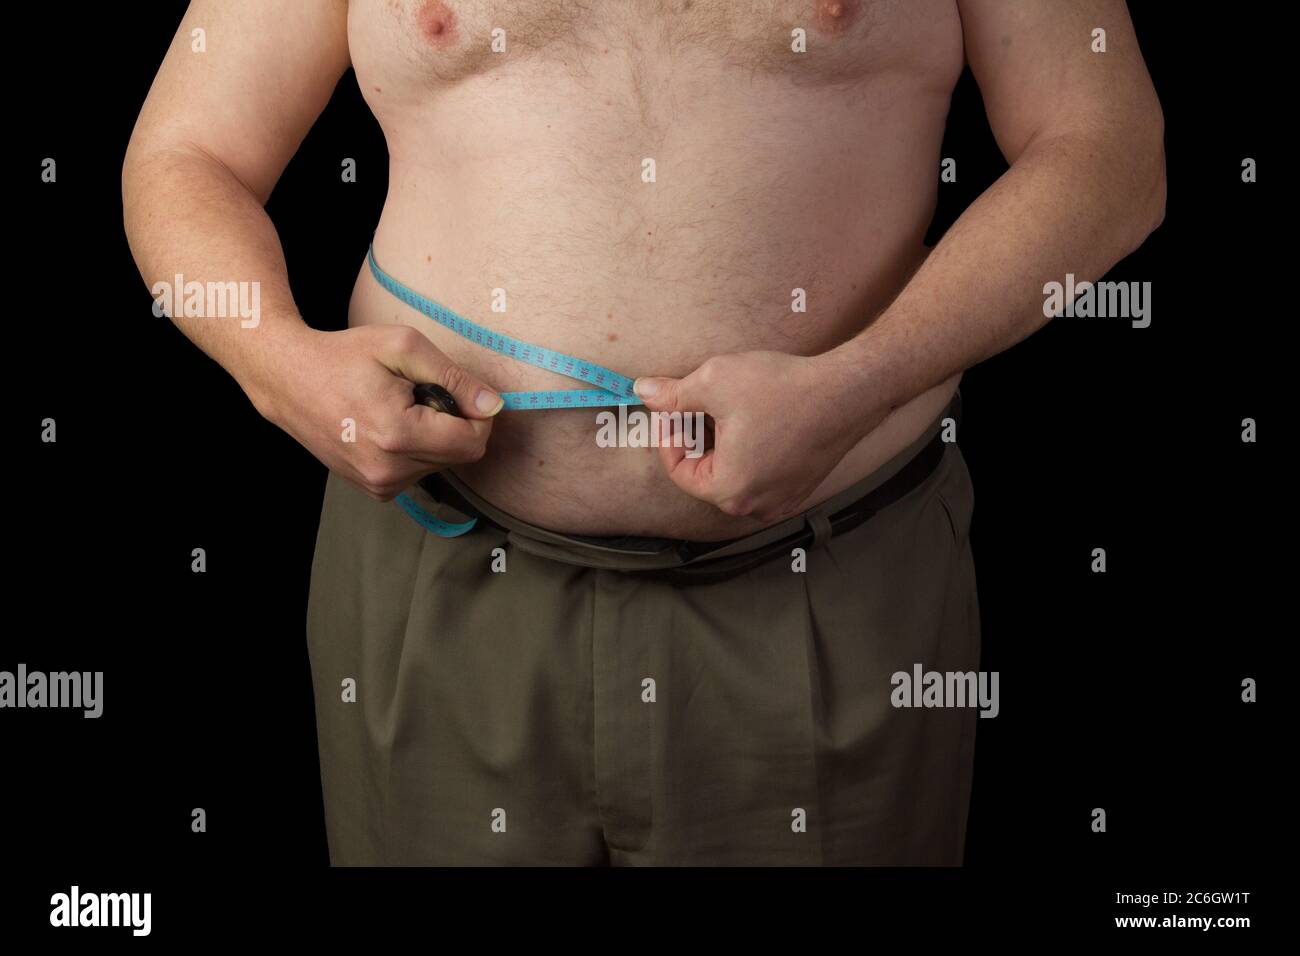 Fat man holding a measuring tape, measure your abdomen. Weight Loss. Photo on black background isolated Stock Photo